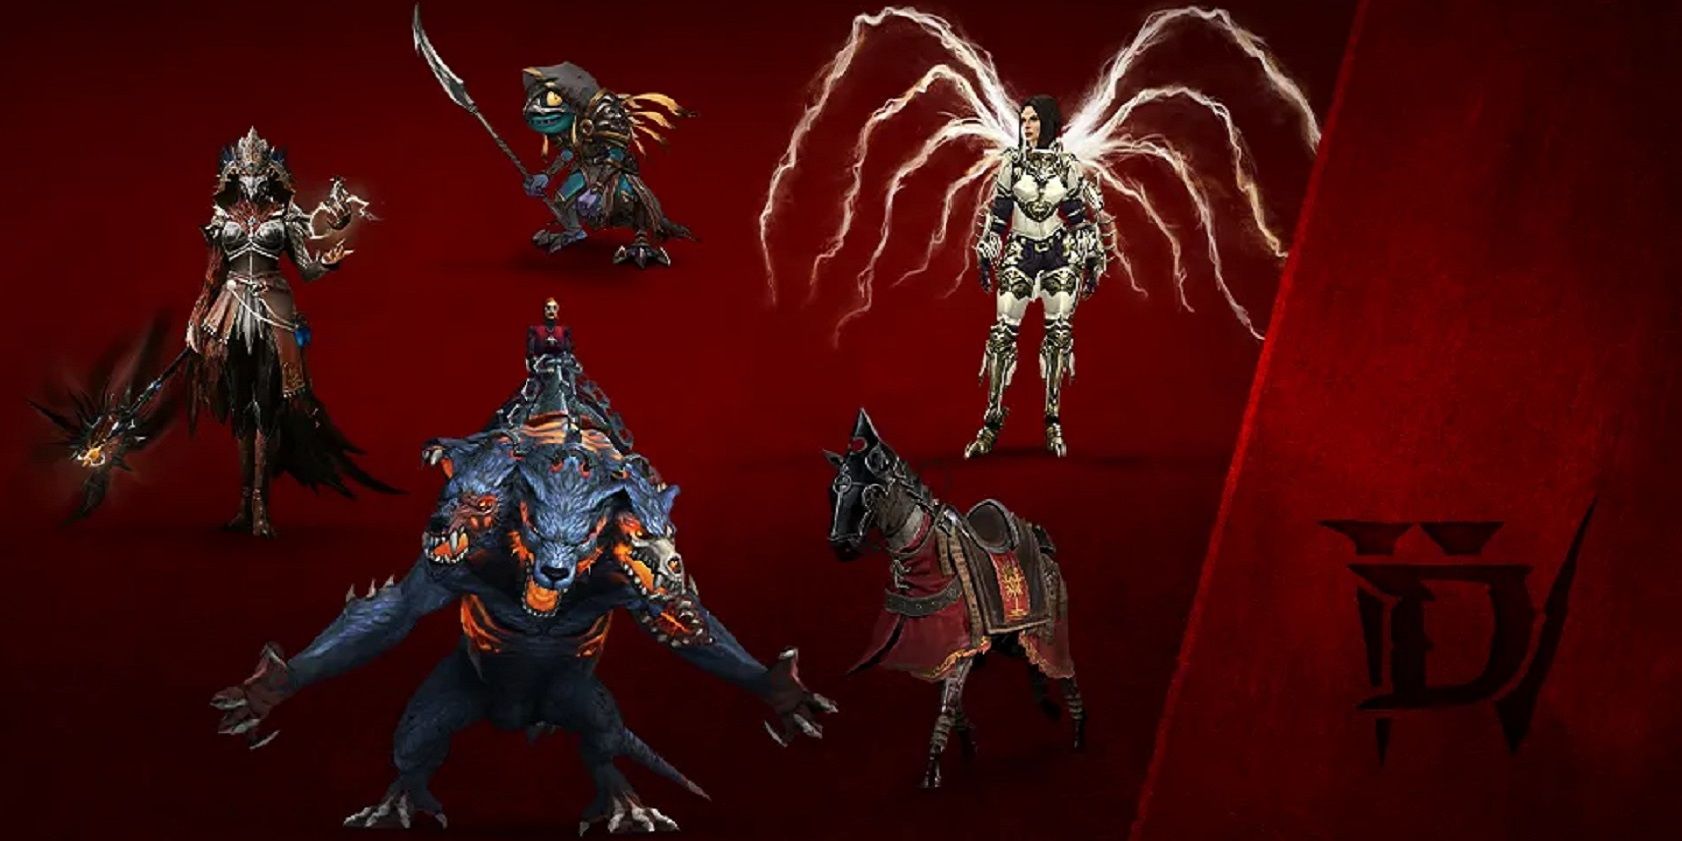 An image of the digital items that players will receive for pre-ordering the Standard Edition of Diablo 4.